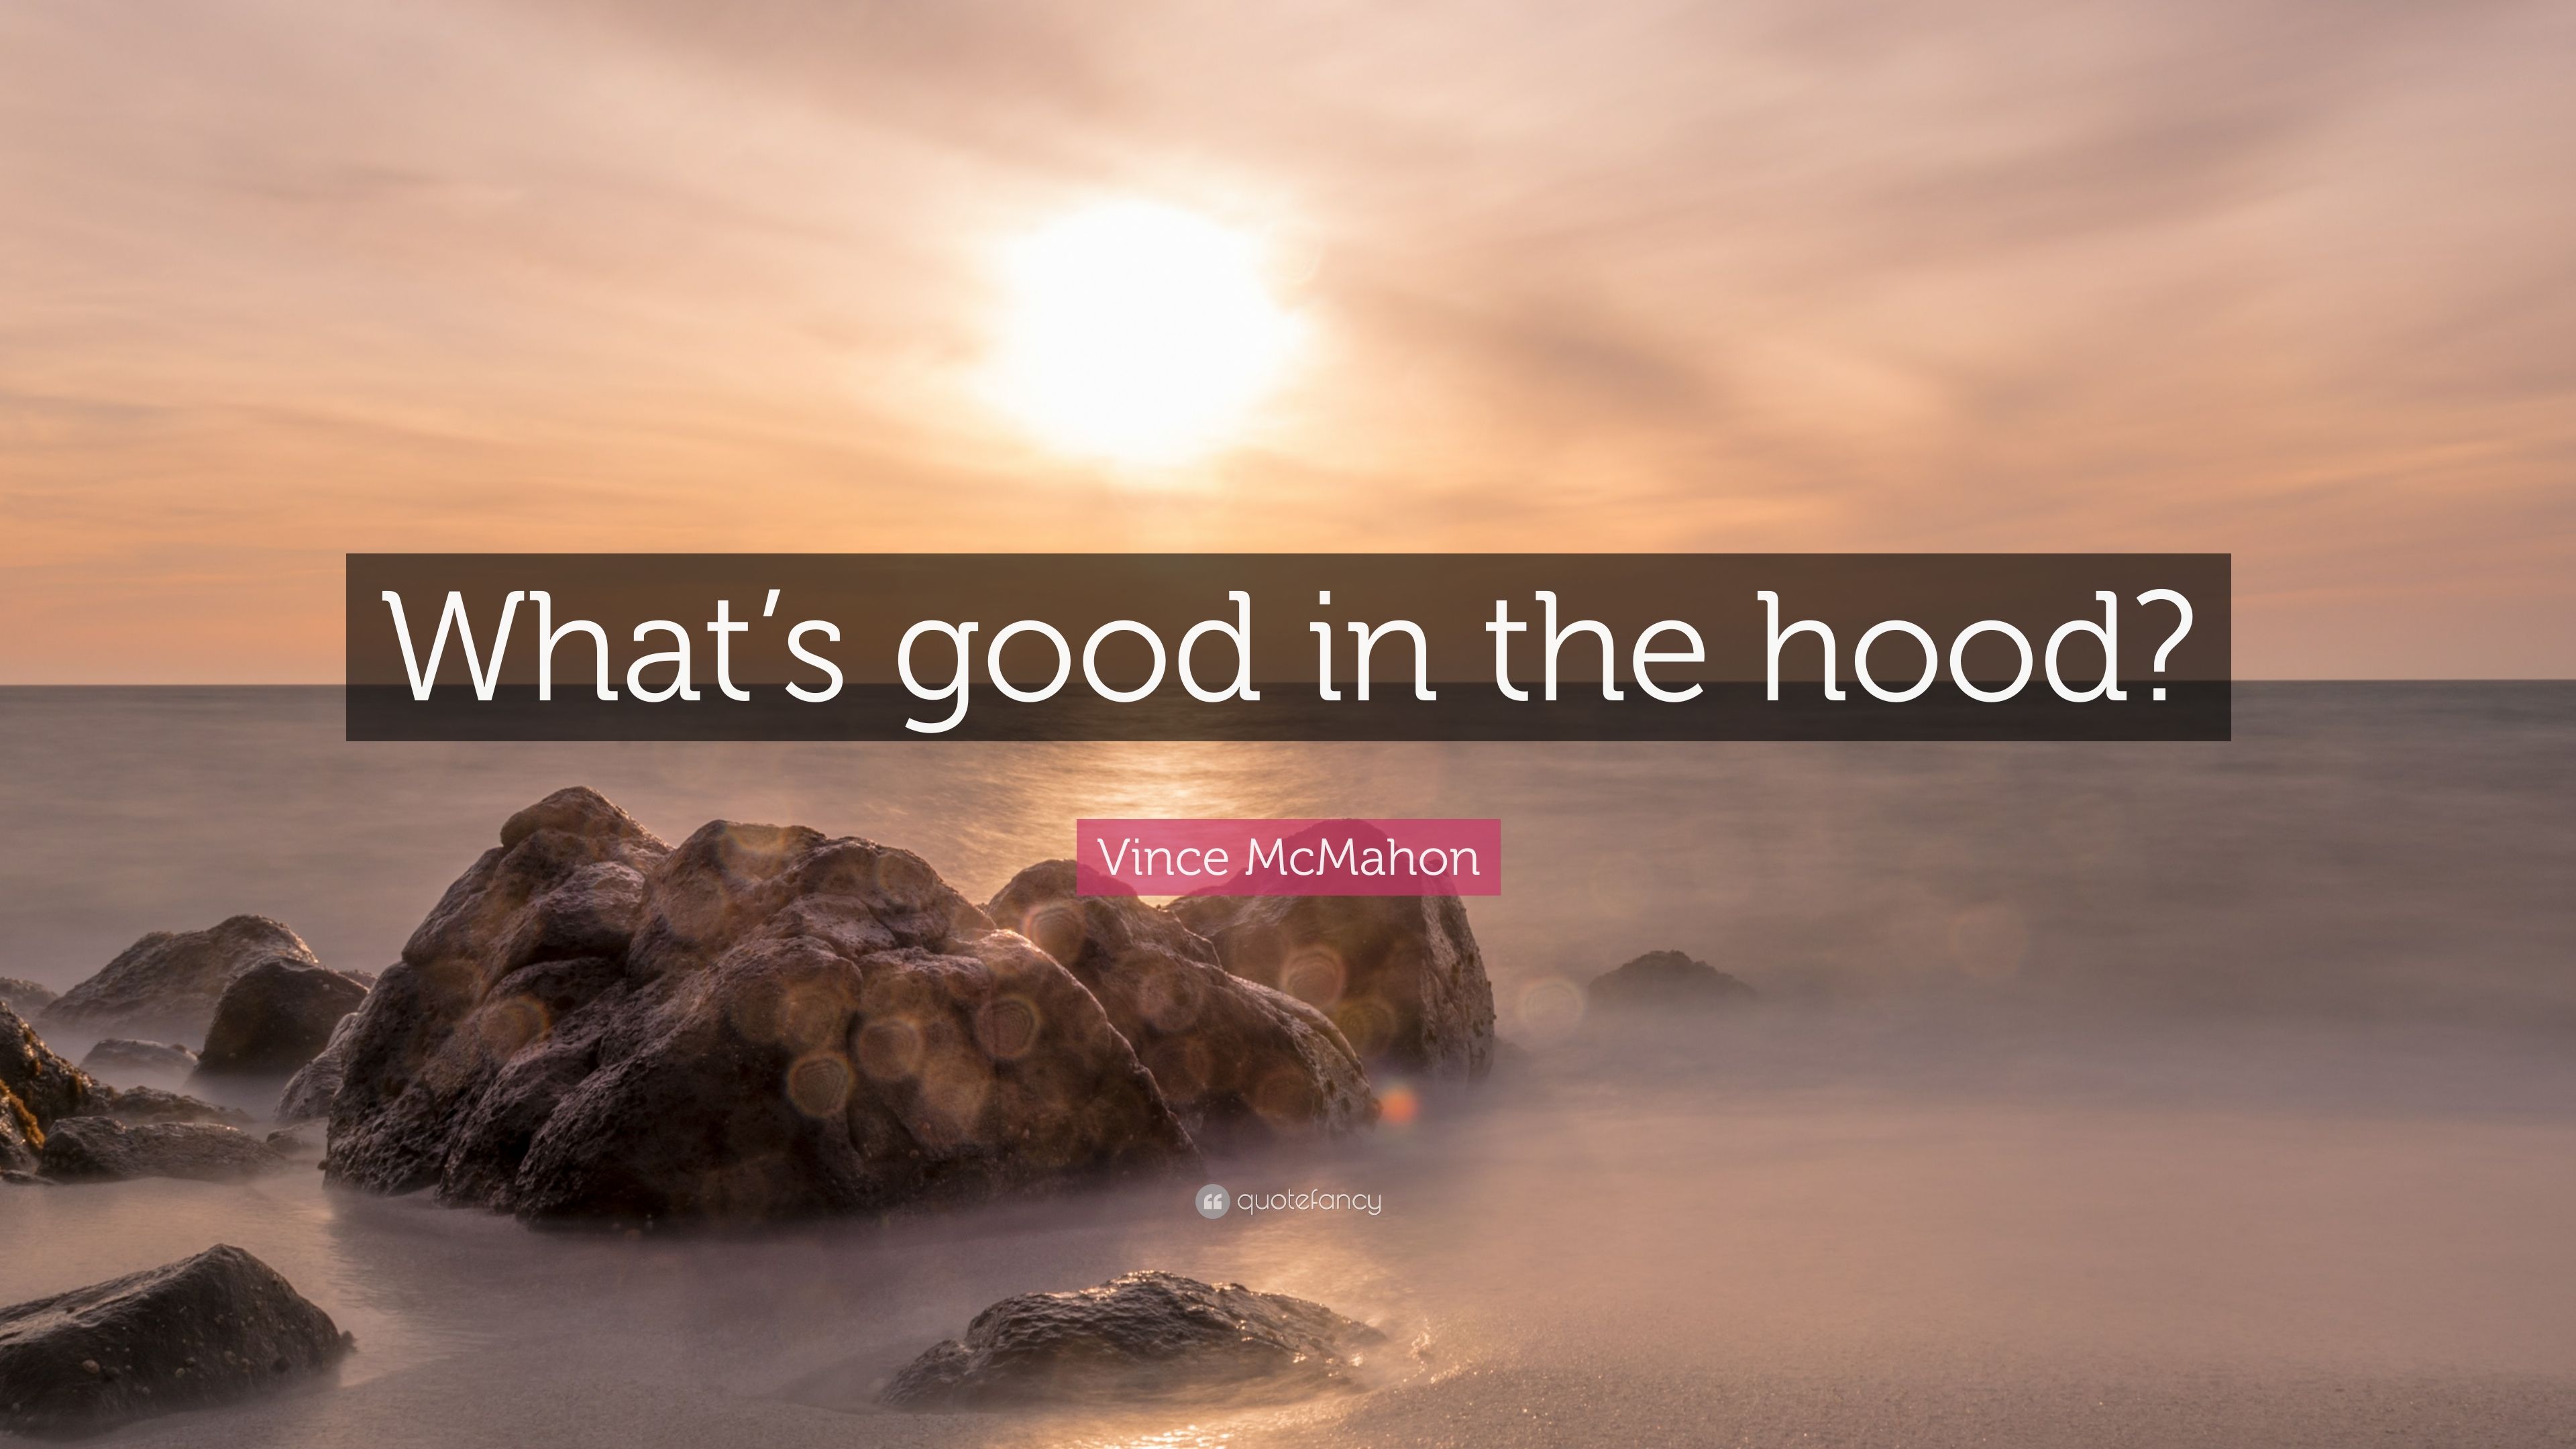 Vince McMahon Quote: “What's good in the hood?” 7 wallpaper